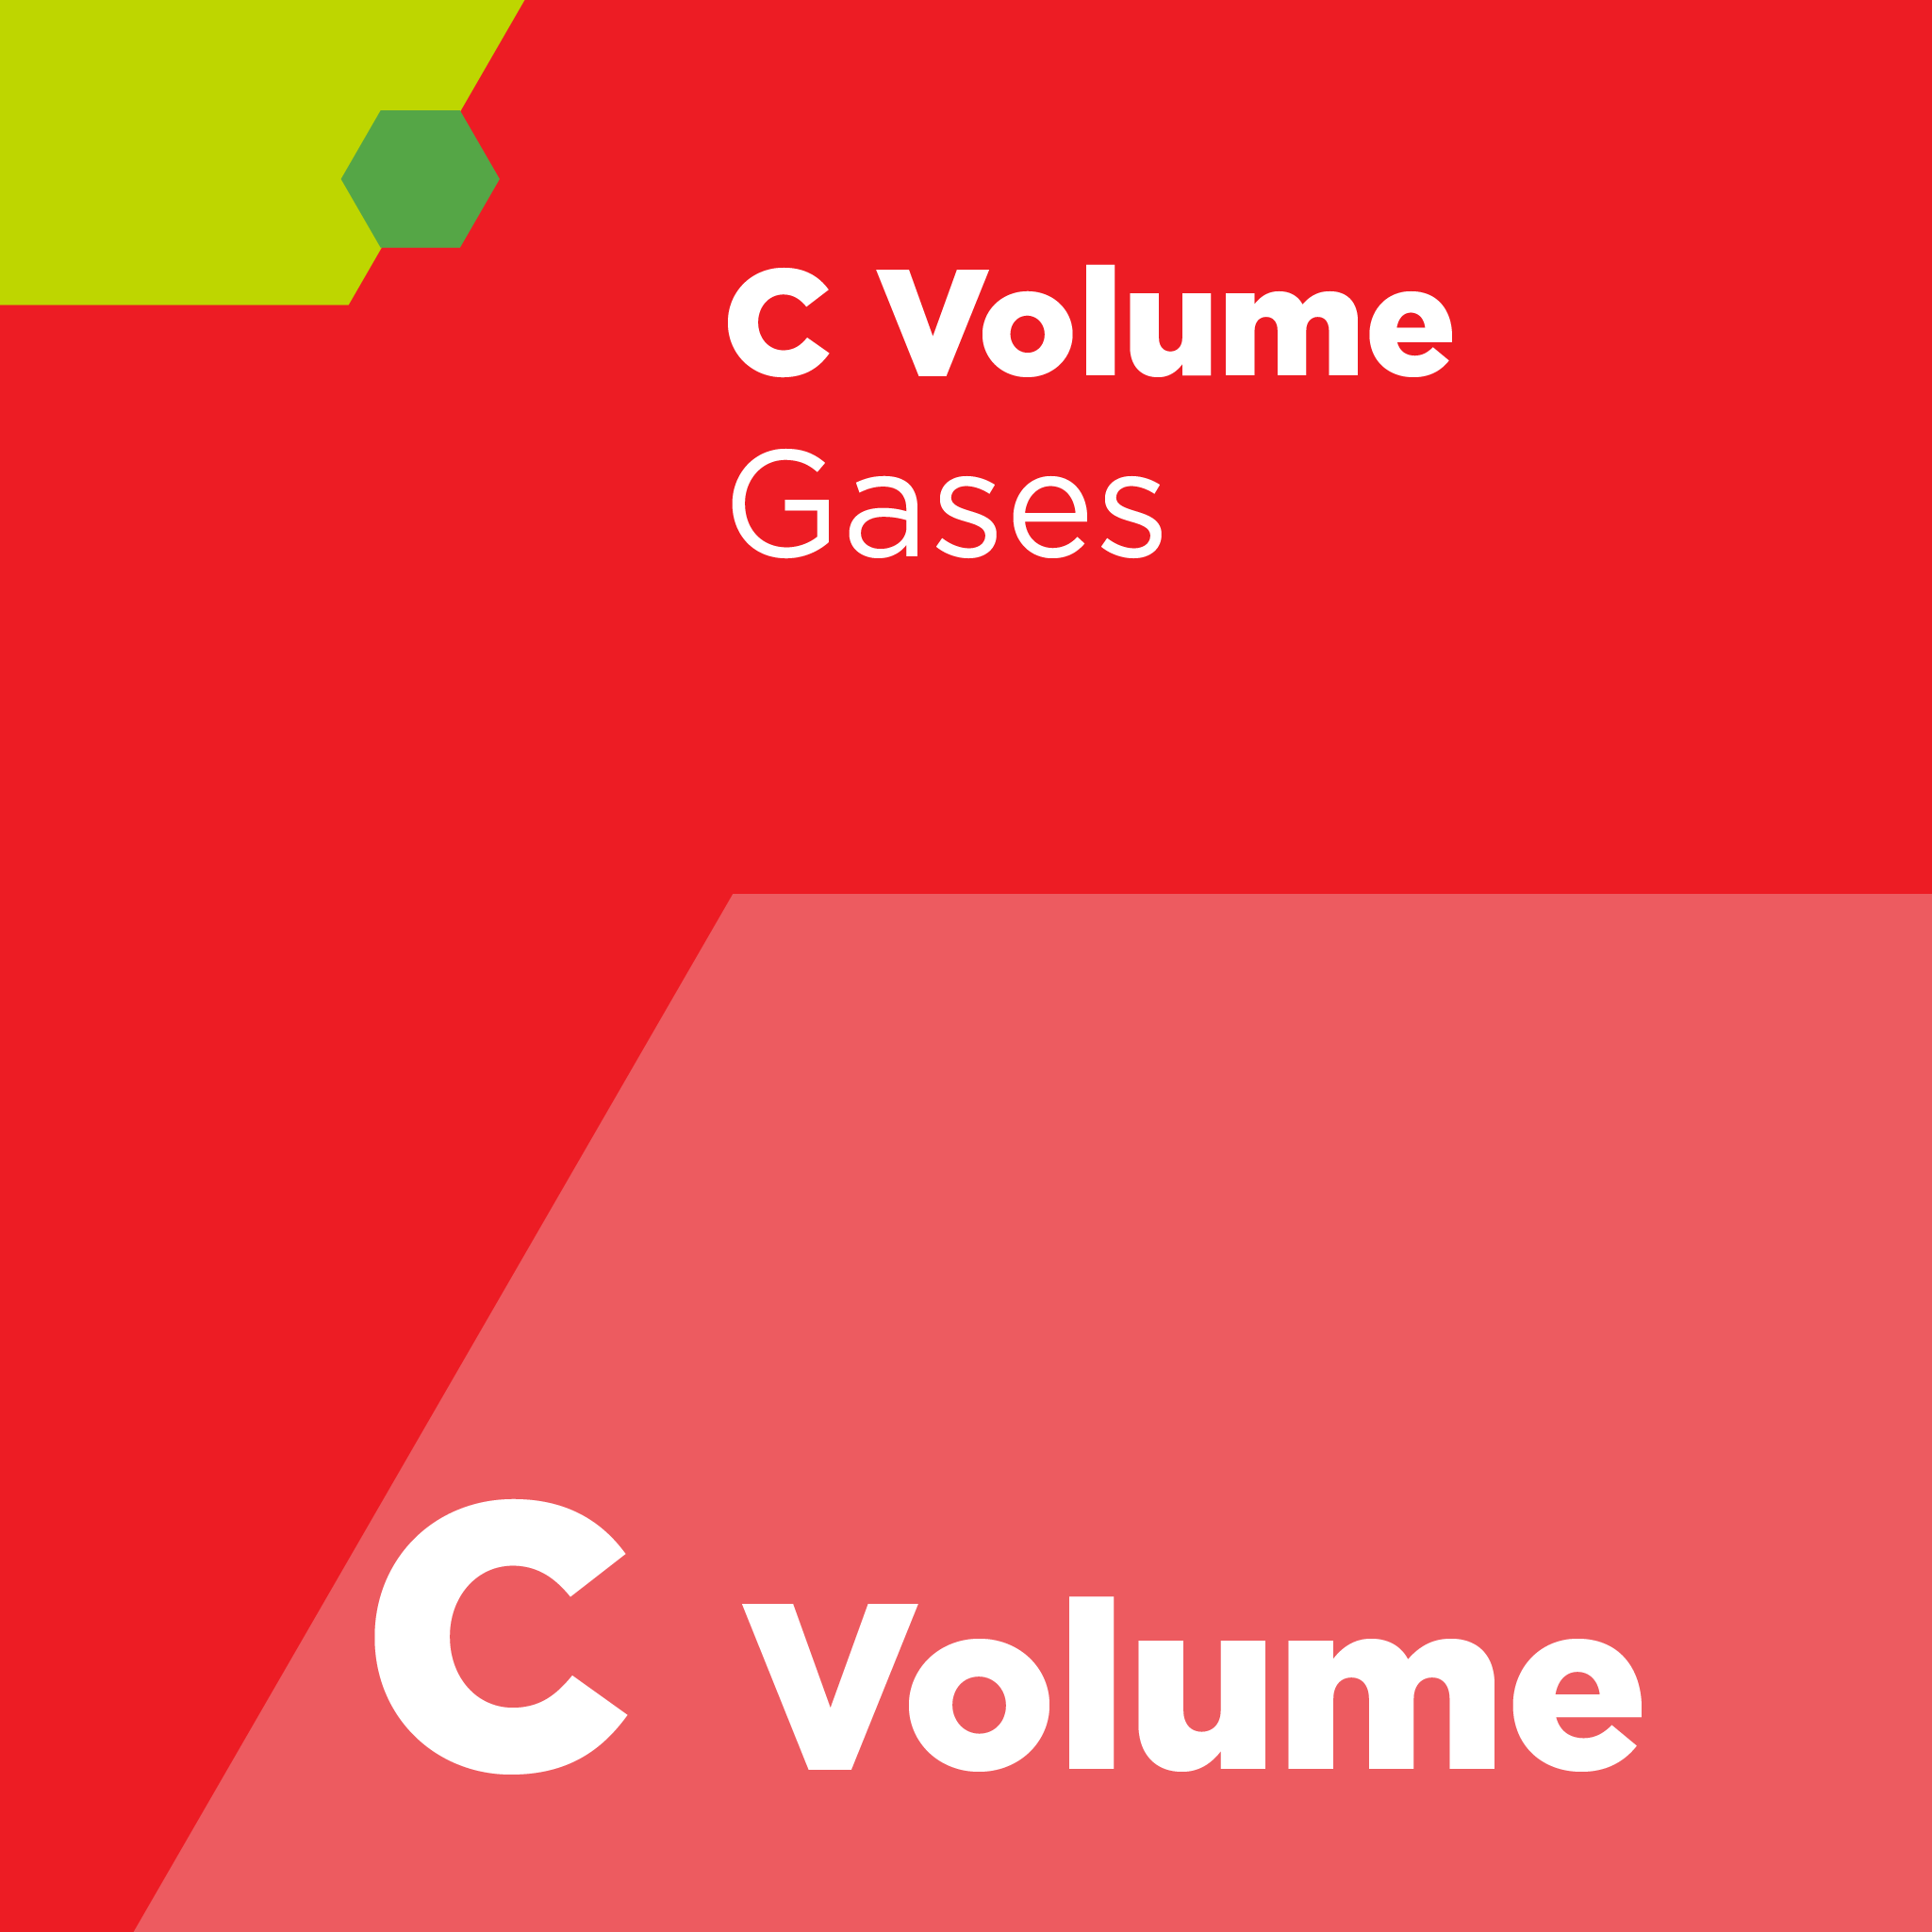 C00302 - SEMI C3.2 - Specification for Arsine (AsH3) in Cylinders, 99.94% Quality